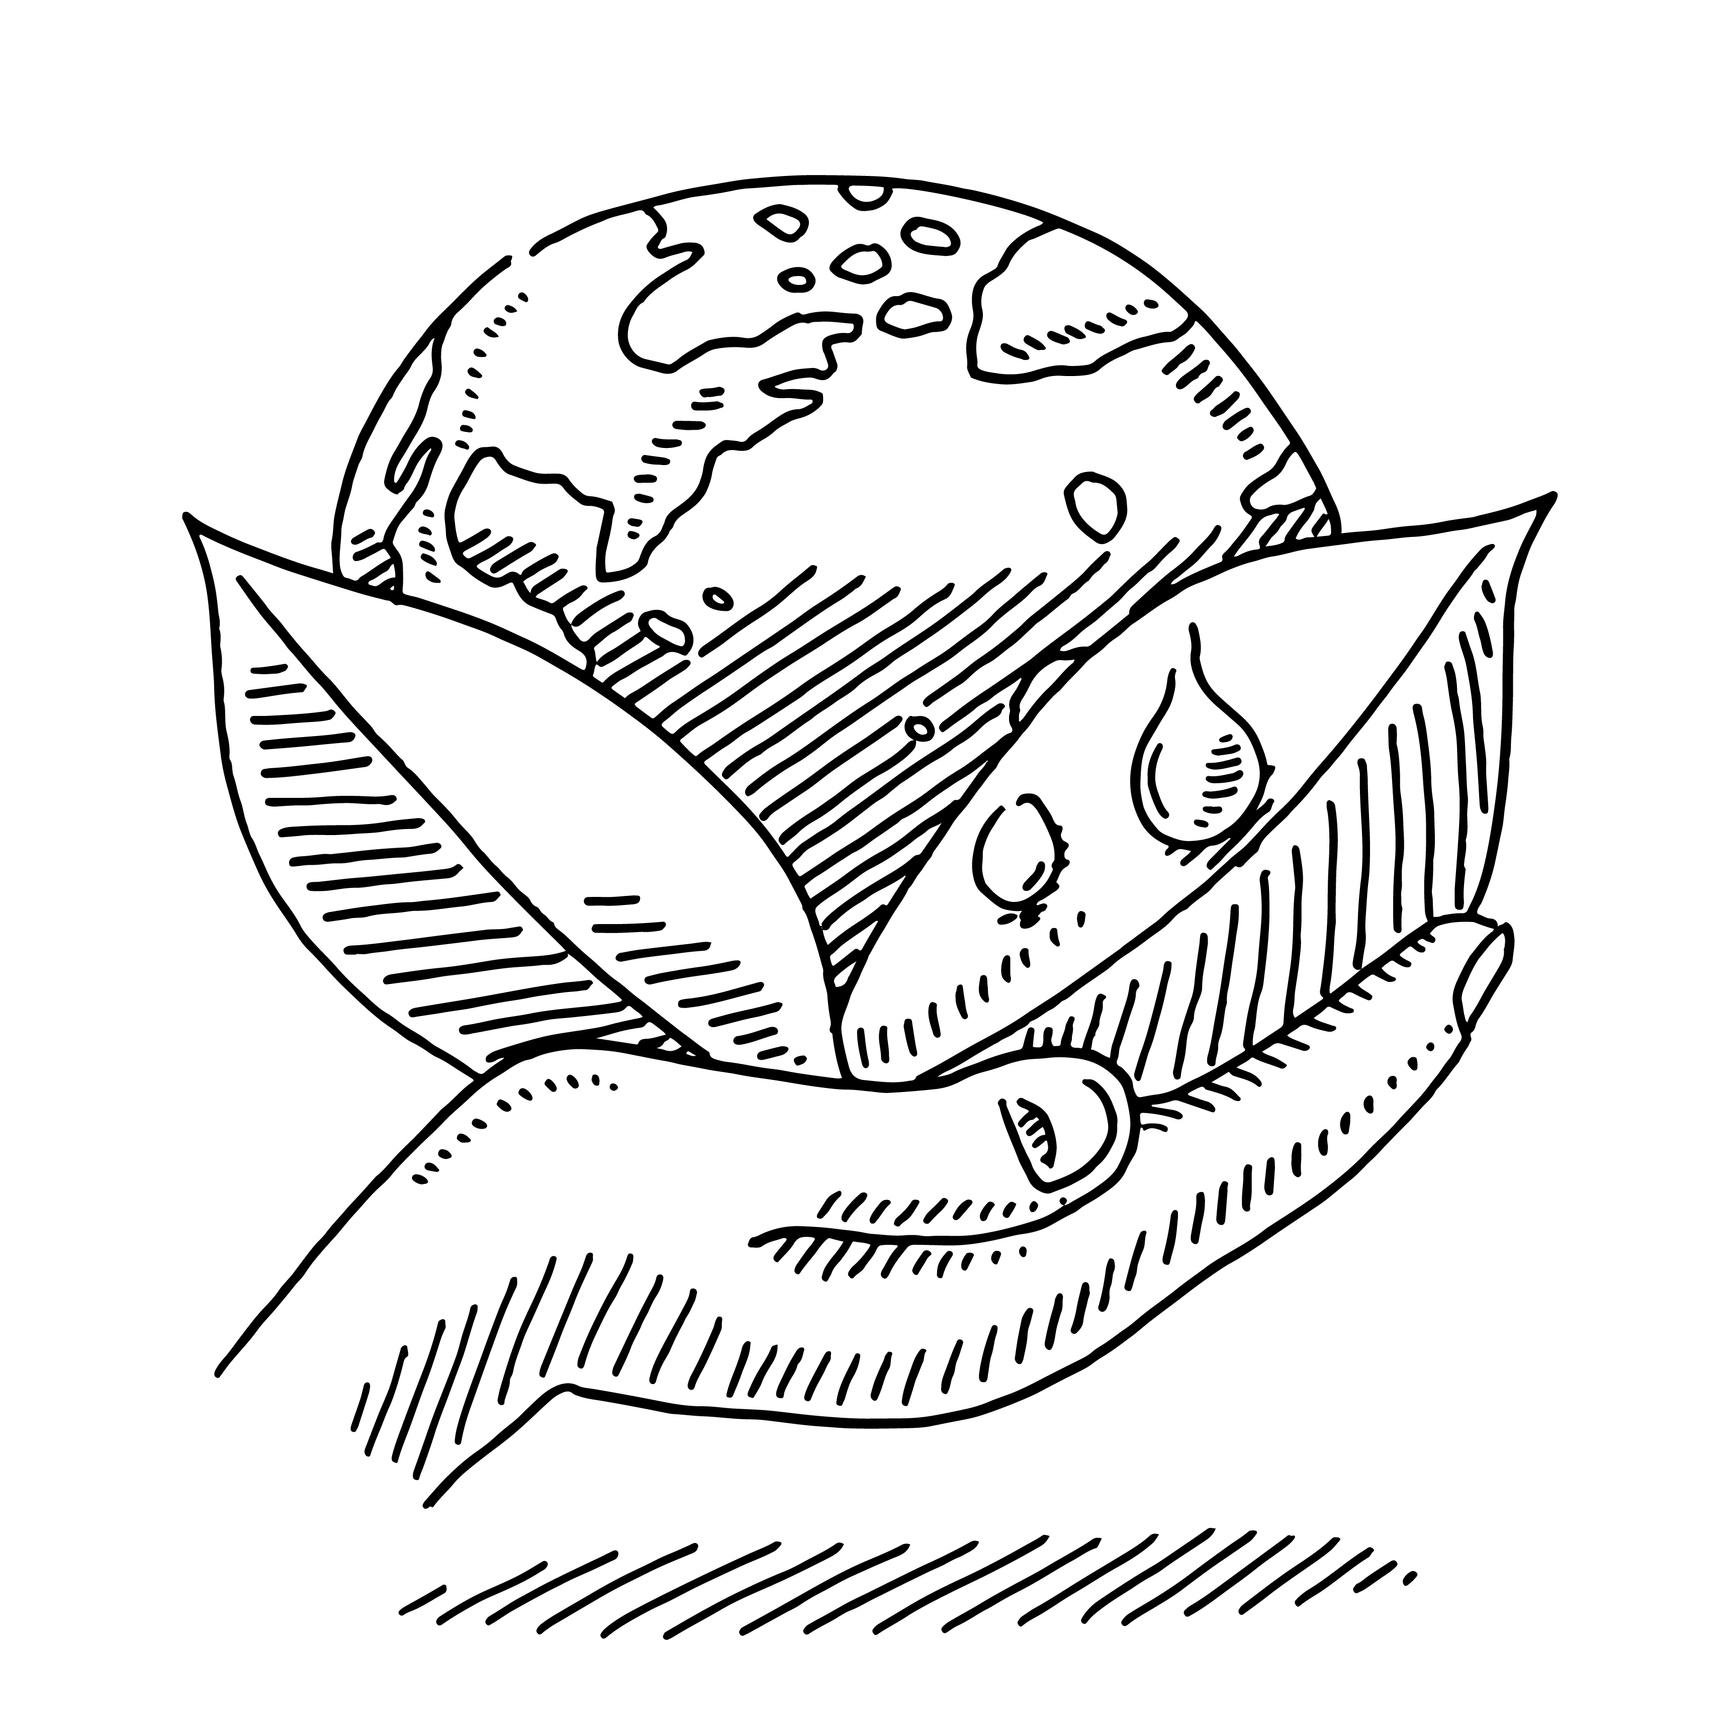 Illustration of the earth in a hand